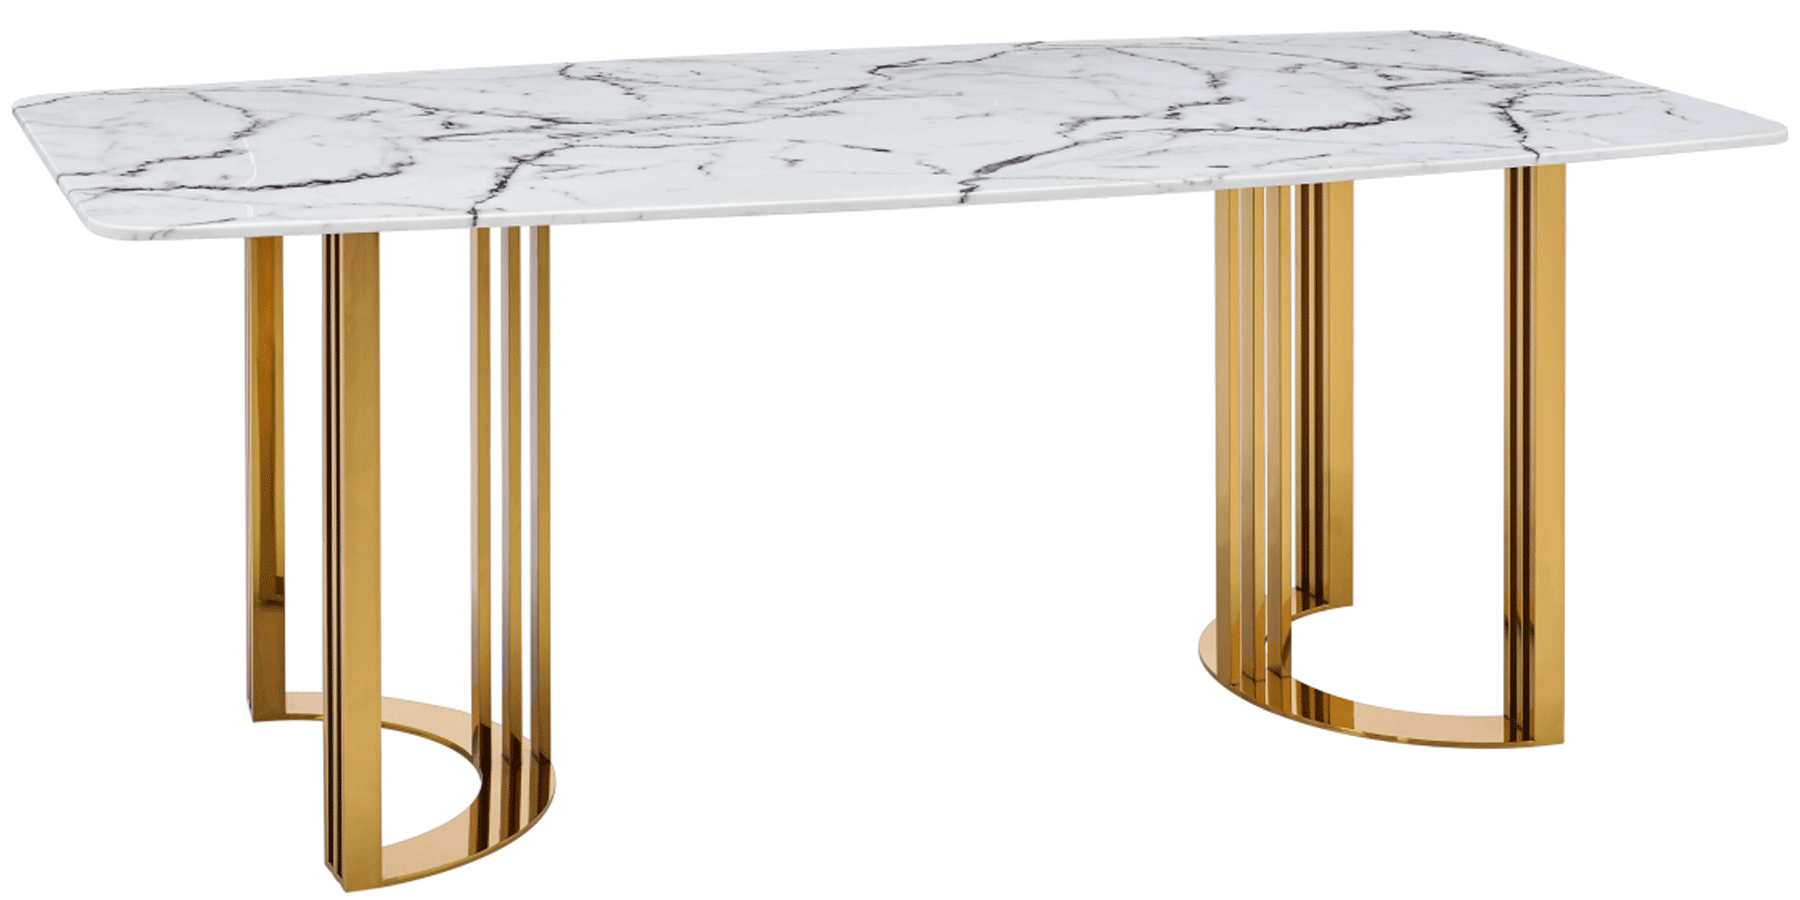 Dining Room Furniture Kitchen Tables and Chairs Sets 131 Gold Marble Dining Table